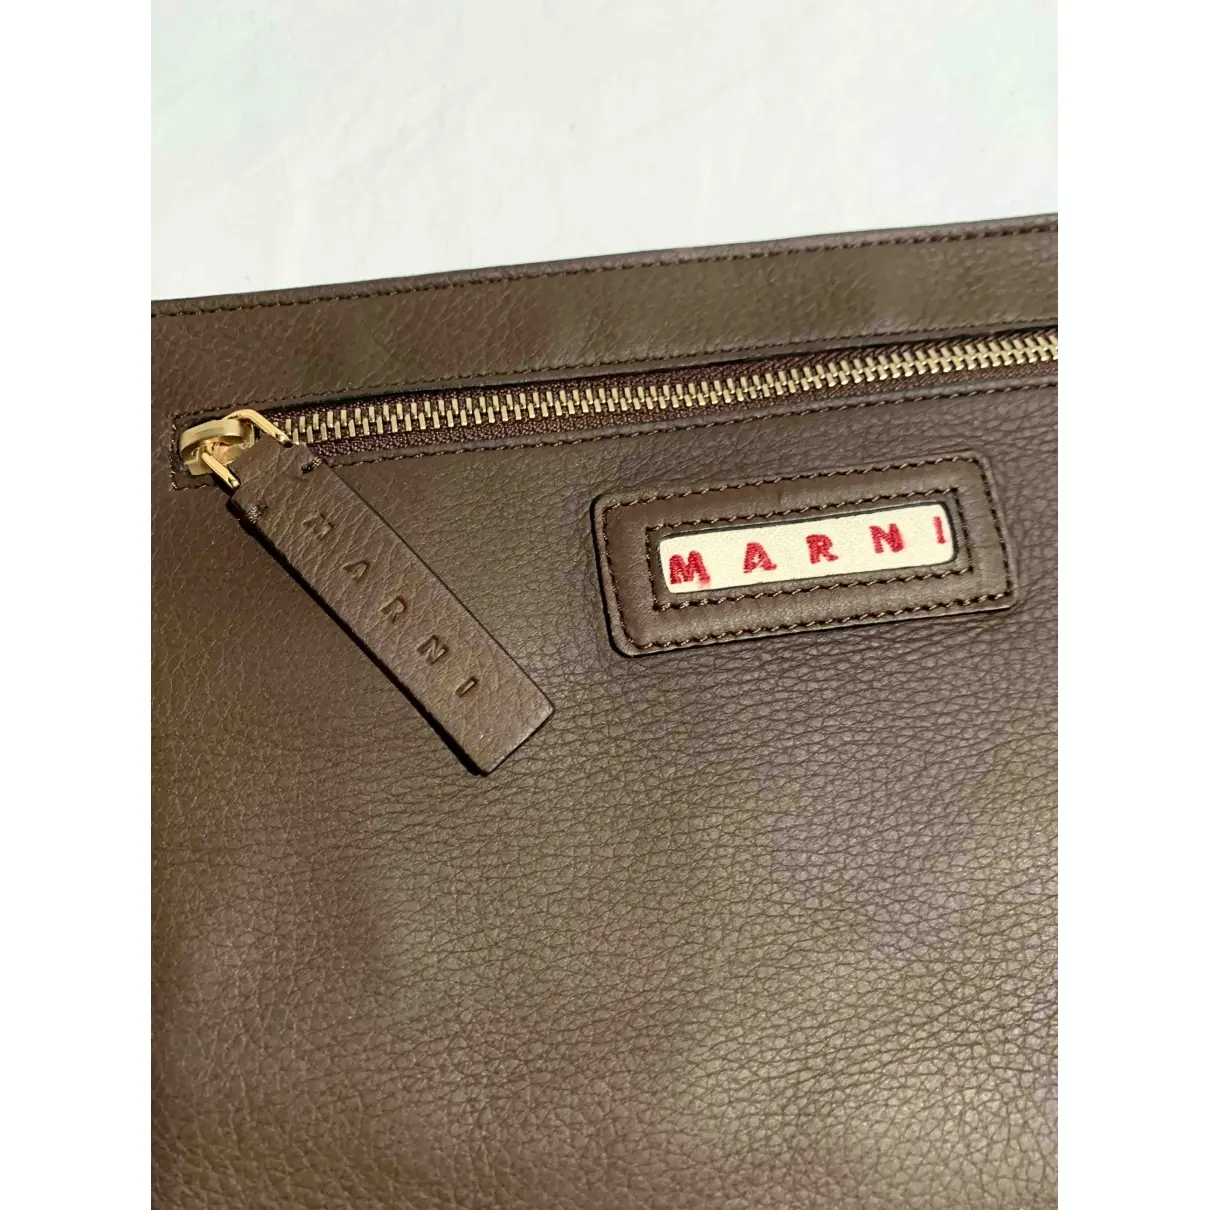 Luxury Marni Small bags, wallets & cases Men